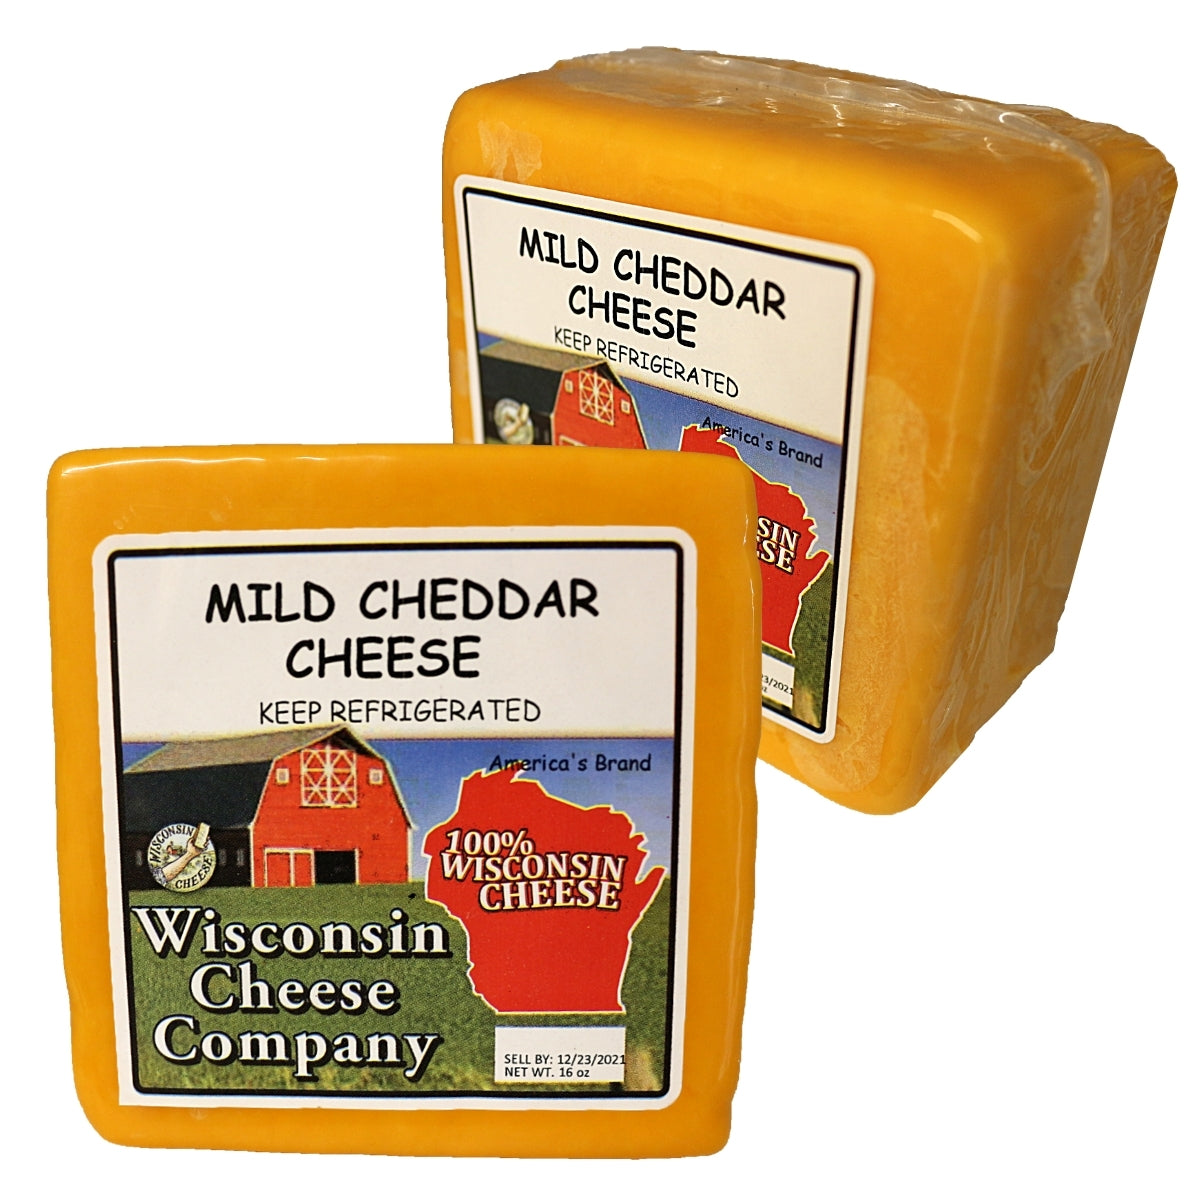 Two blocks of Mild Cheddar Cheese